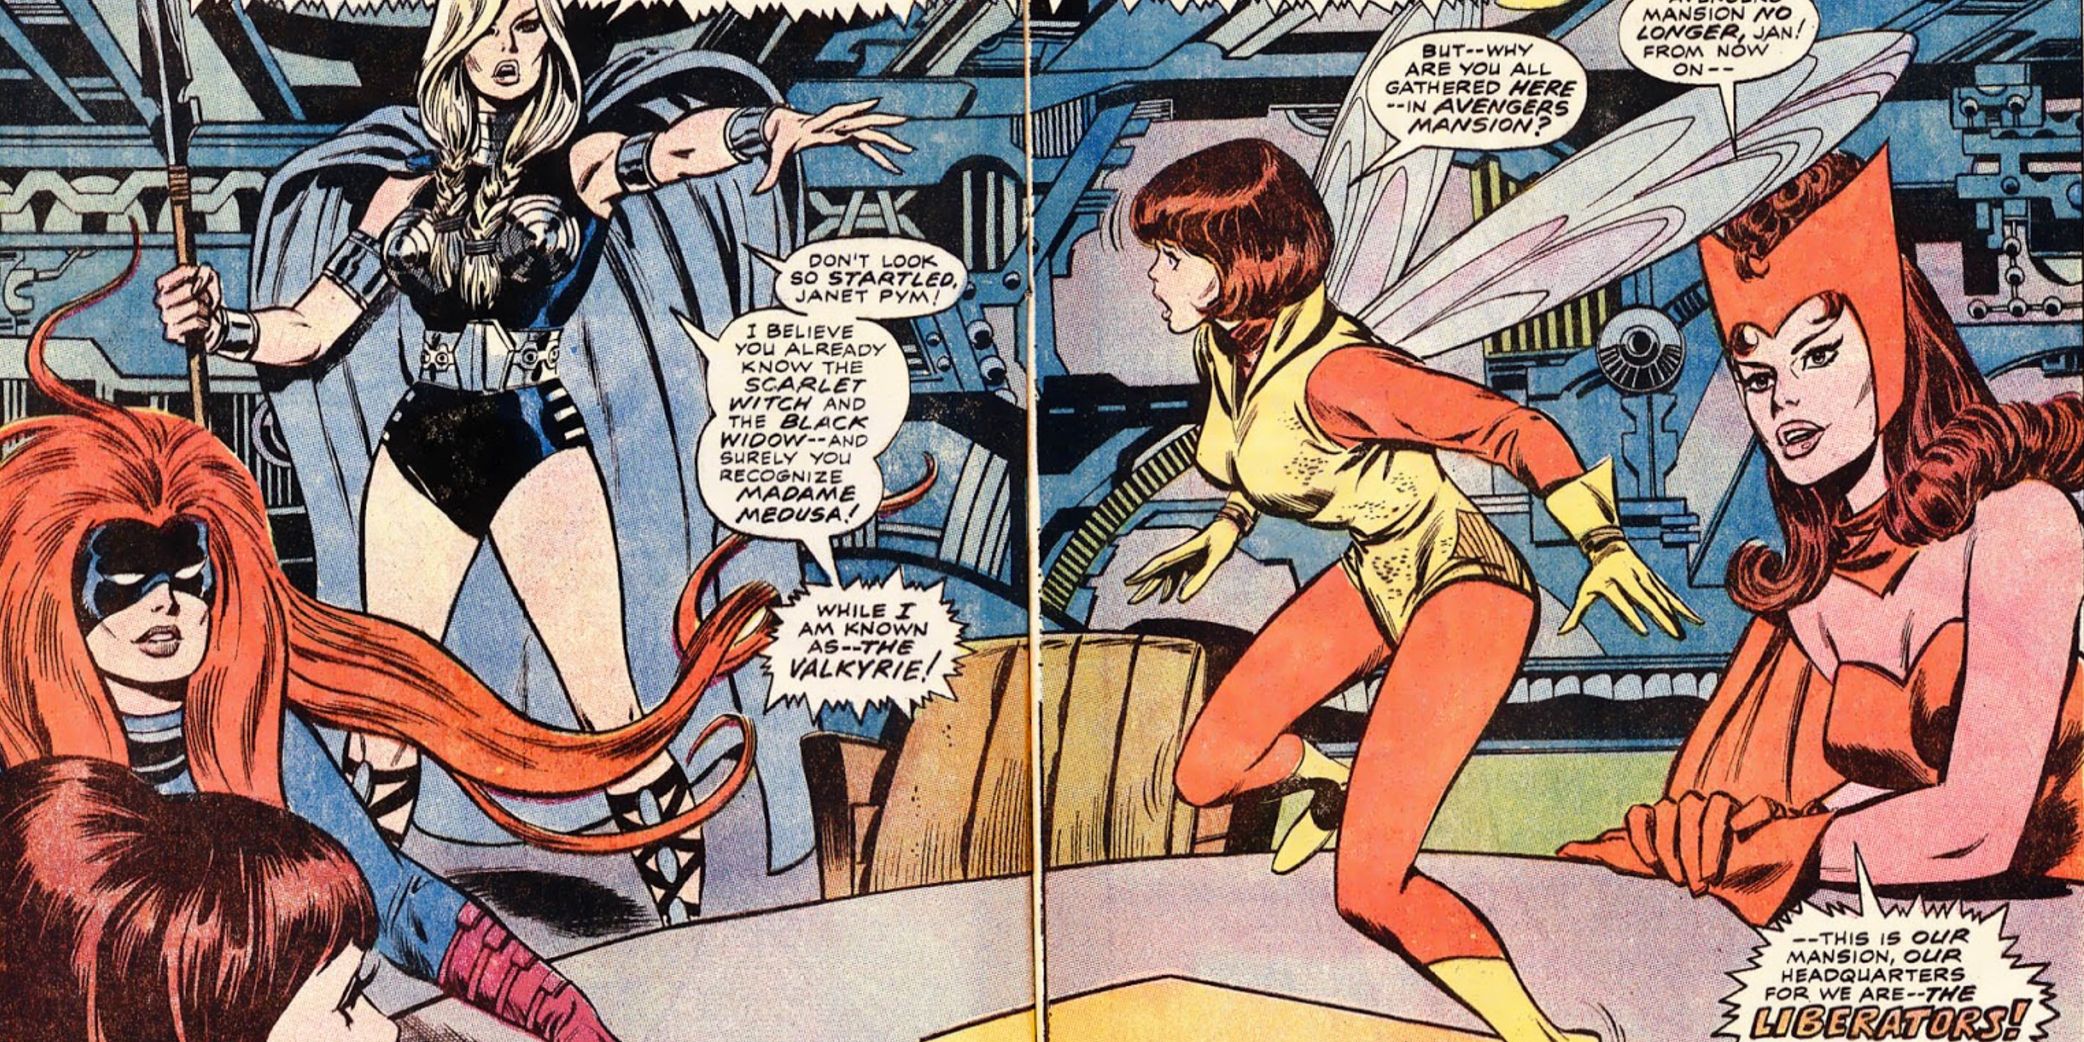 Marvel female heros sits around a table in a panel from a Marvel comic book.